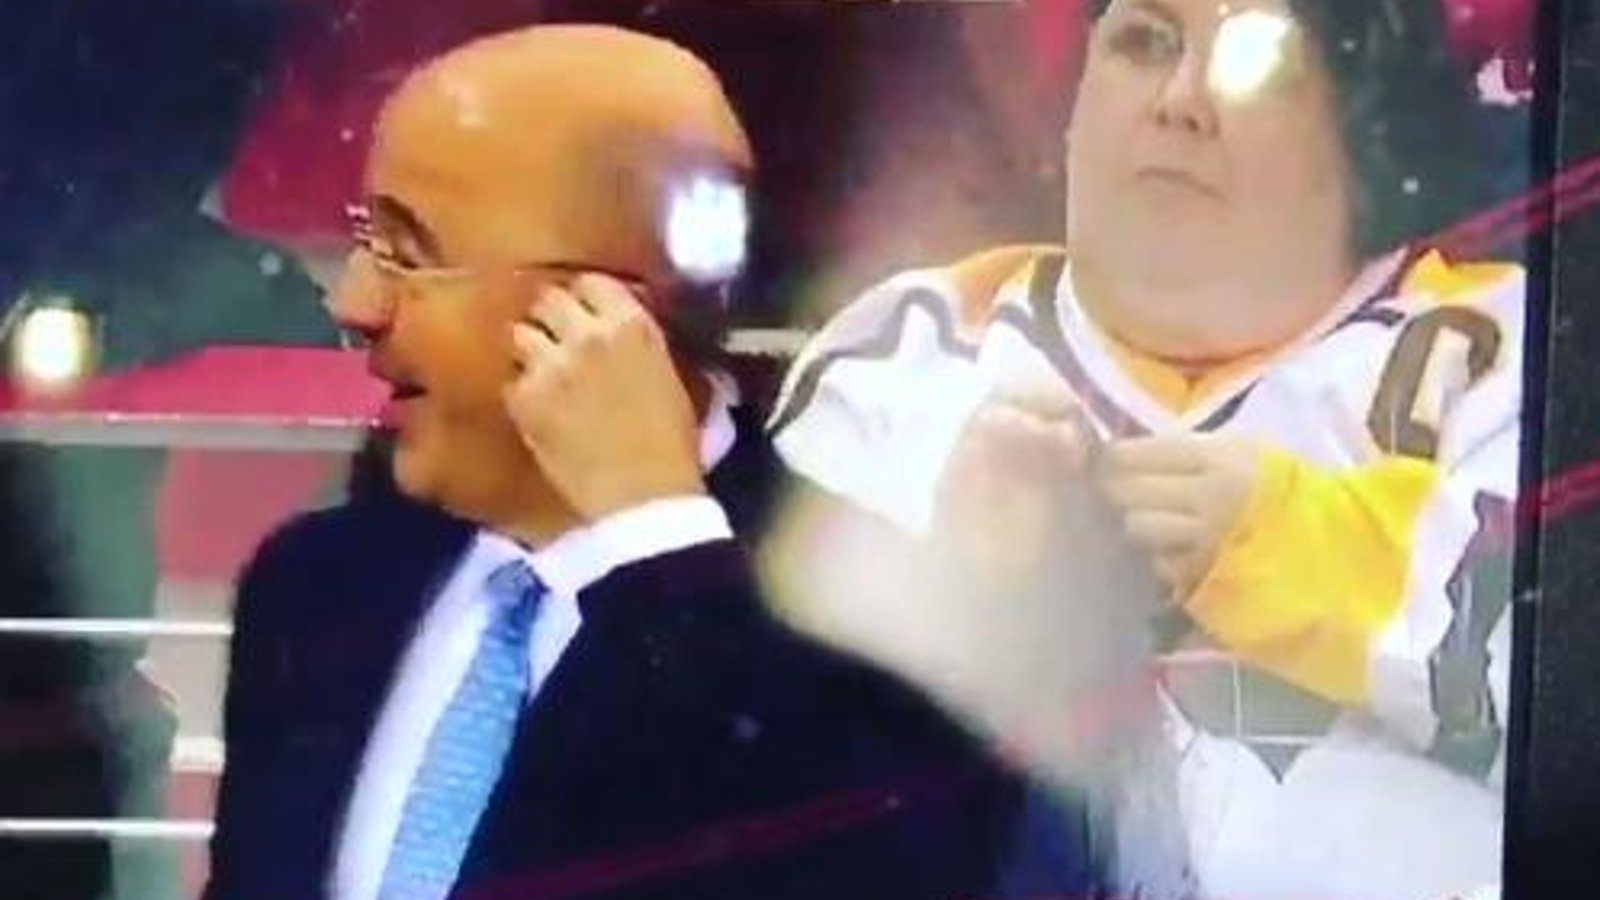 Hockey fan attracts attraction for weird reasons! 